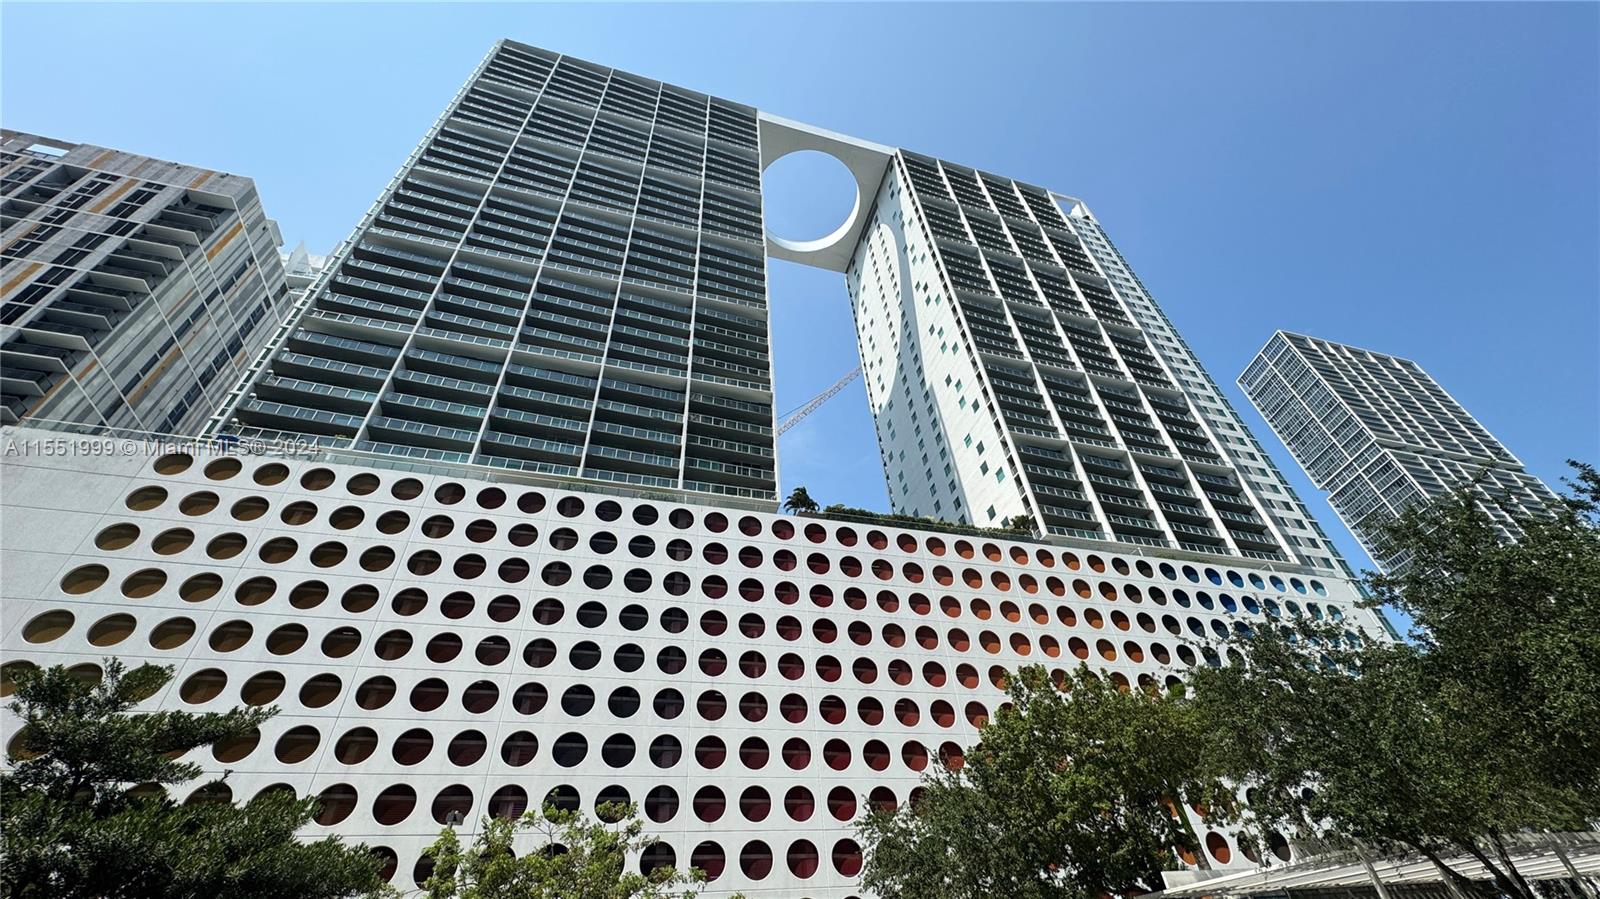 CORNER UNIT in the heart of Brickell. 2 MASTER BEDROOMS with en-suite bathrooms, split floor plan. Marble flooring throughout. Open kitchen concept, fully equipped, bright & spacious social area ideal for family and friends gathering. Marble countertops and glass shower doors in both bathrooms, state of the art washer and dryer, the A/C unit was replaced in 2023, 2 PARKING SPOT INCLUDED and bright condo in the awarded condominium 500 Brickell. Features an amazing rooftop on the 42nd Floor. Fitness center, Spa including: Sauna, steam room, jacuzzi. Just 1 block from Brickell City Center, and 2 blocks from Mary Brickell Village and Downtown area. SHORT TERM RENTALS ALLOWED 30 DAYS MIN, 12 TIMES PER YEAR.